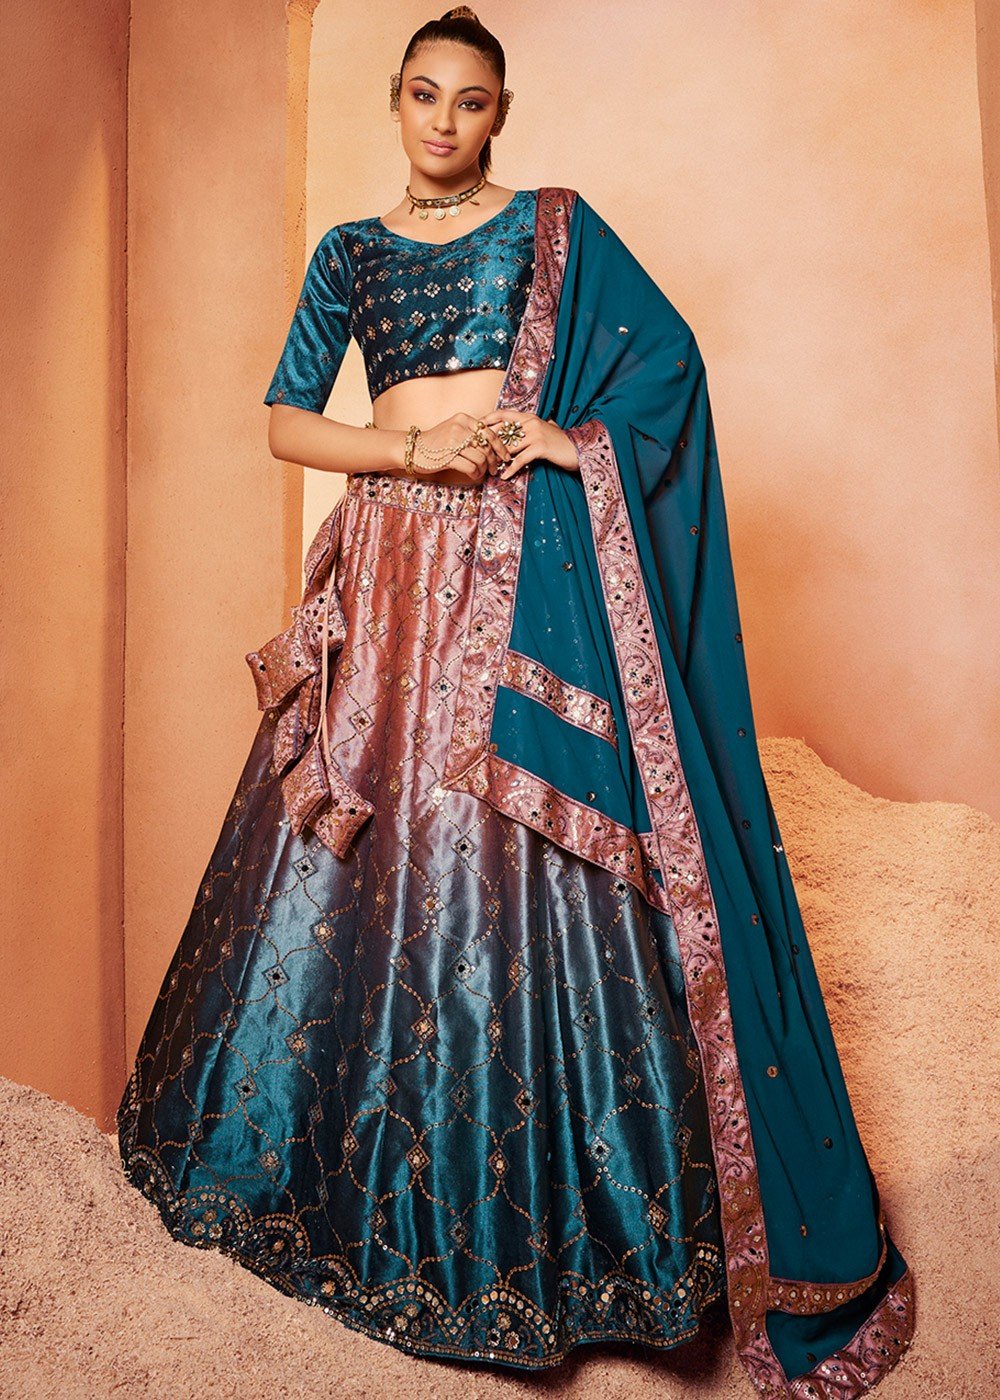 Not getting something unique to compare you beauty.? Check our new Navy  Blue Velvet Silk A Line Lehenga Choli with Hand-Embroidery work. Product  code: 135072 Christmas offer Price: $95 website: www.indianclothstore.com  #indianfashion #